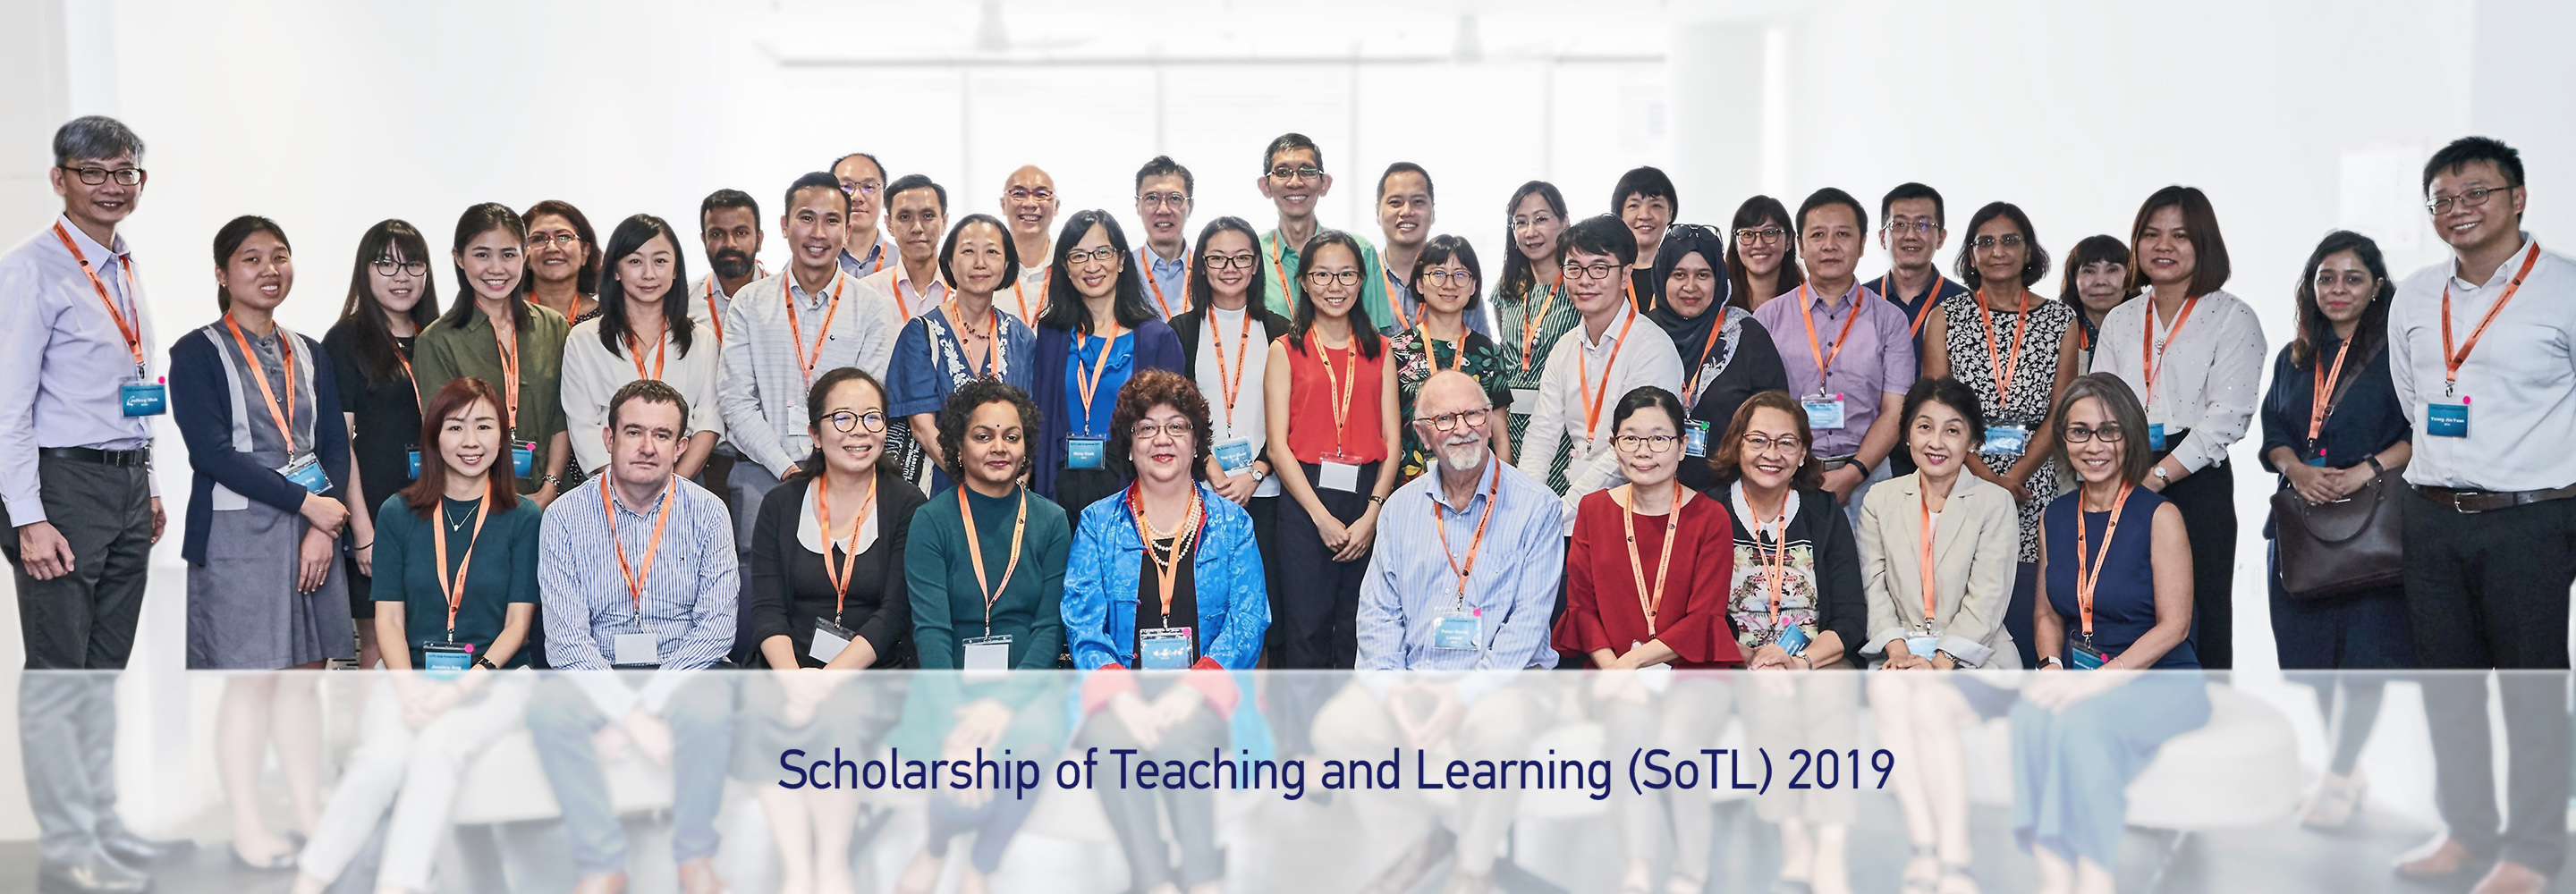 Scholarship of Teaching and Learning (SoTL) participants